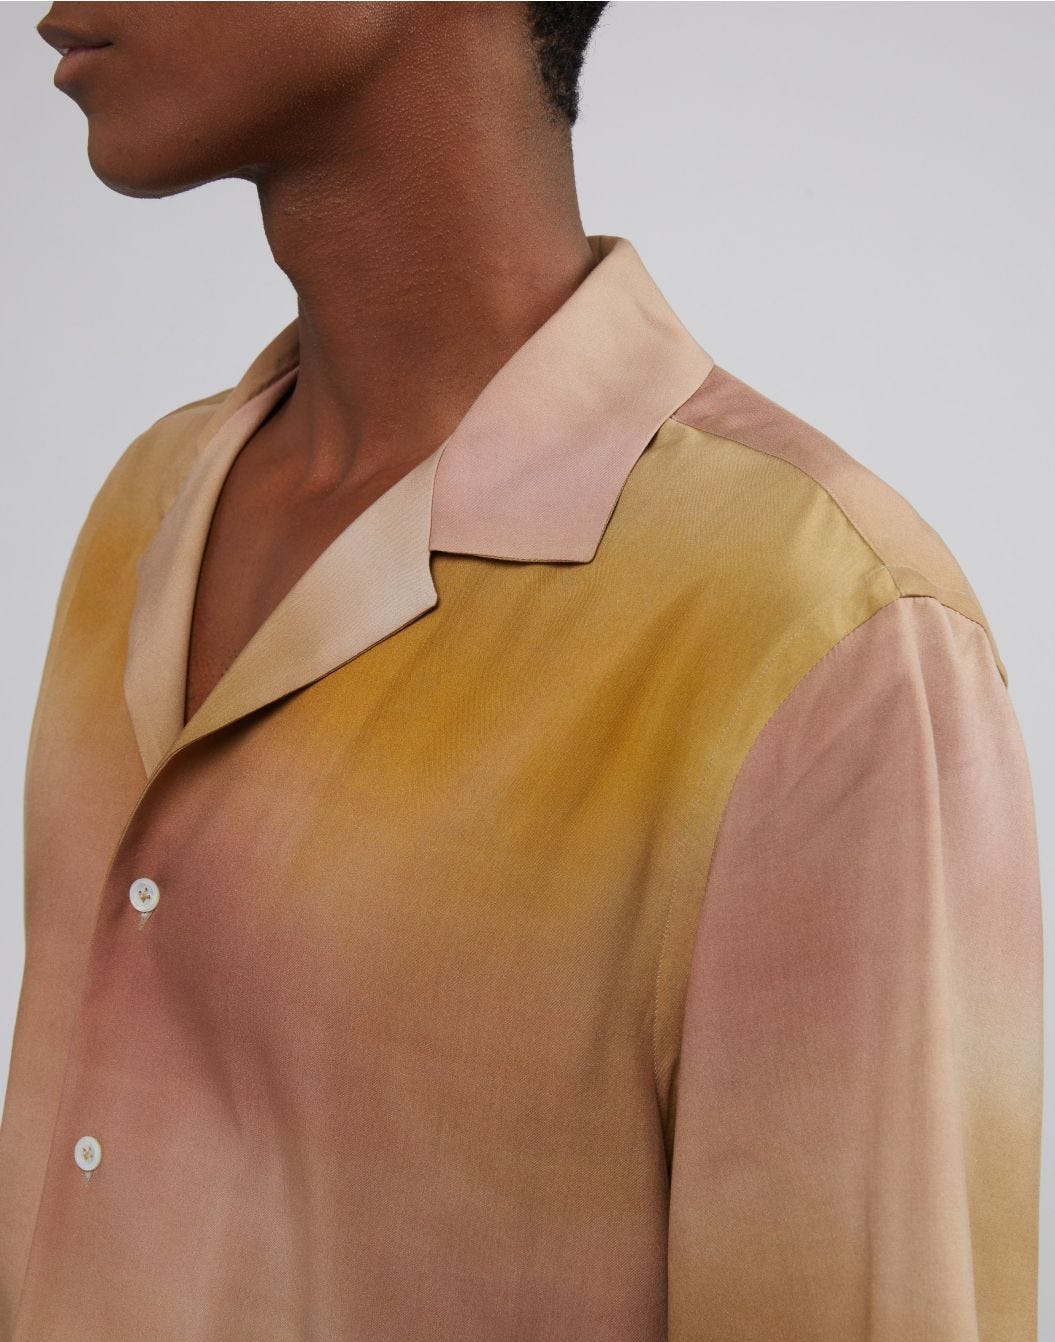 Relaxed shirt with a smooth design and macro-shade 